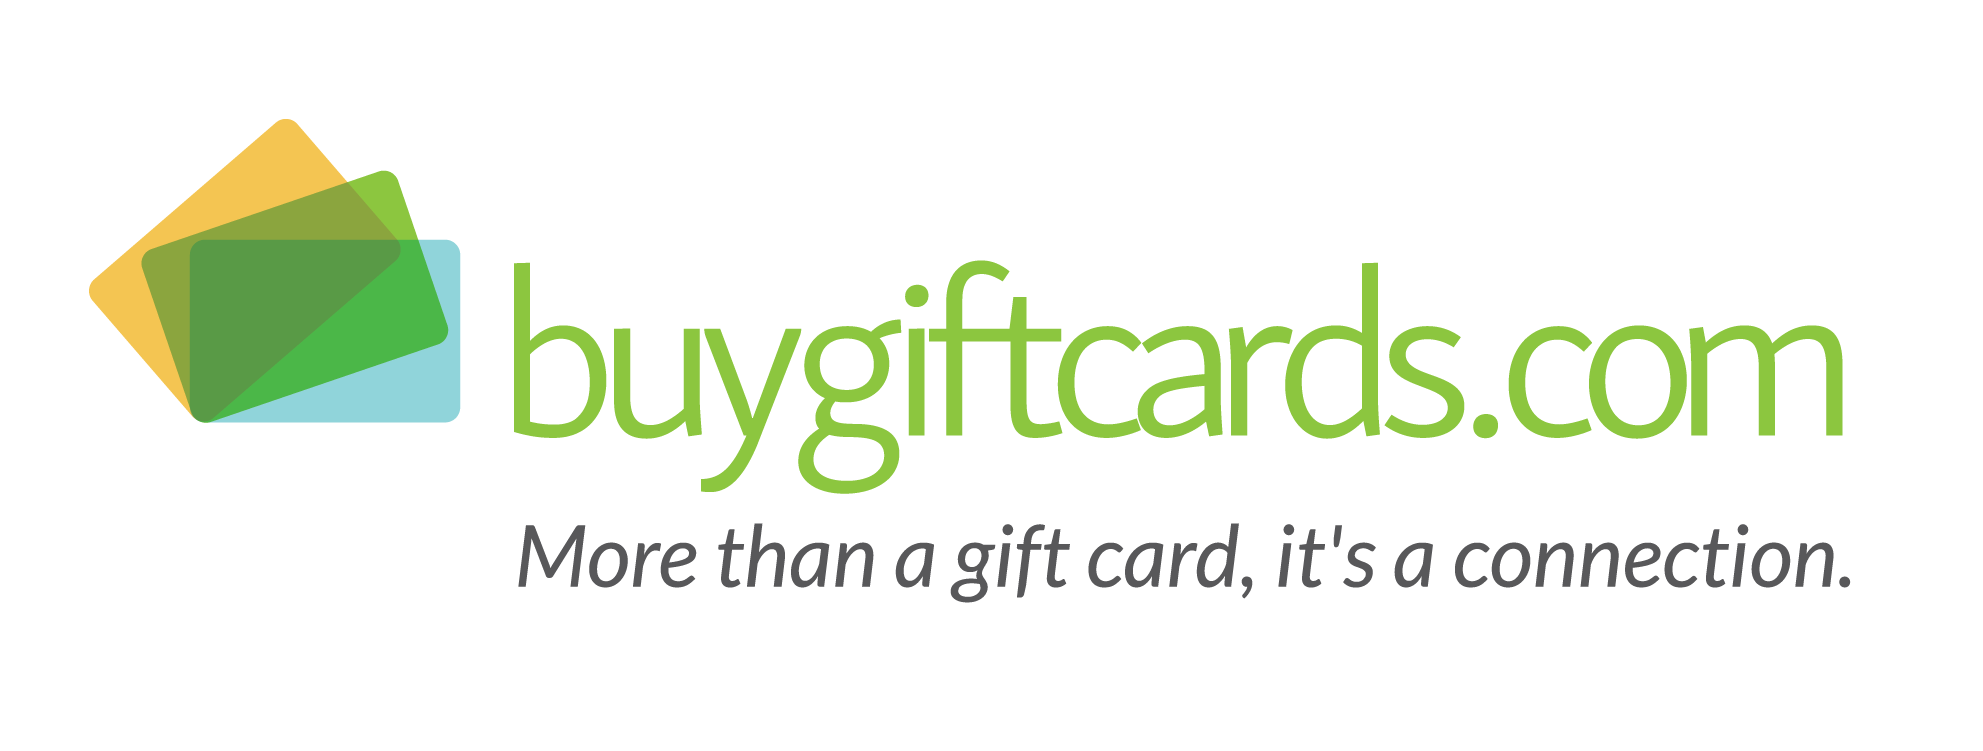 Game Cards Fast Email Delivery  Best Online Source for Gift Cards